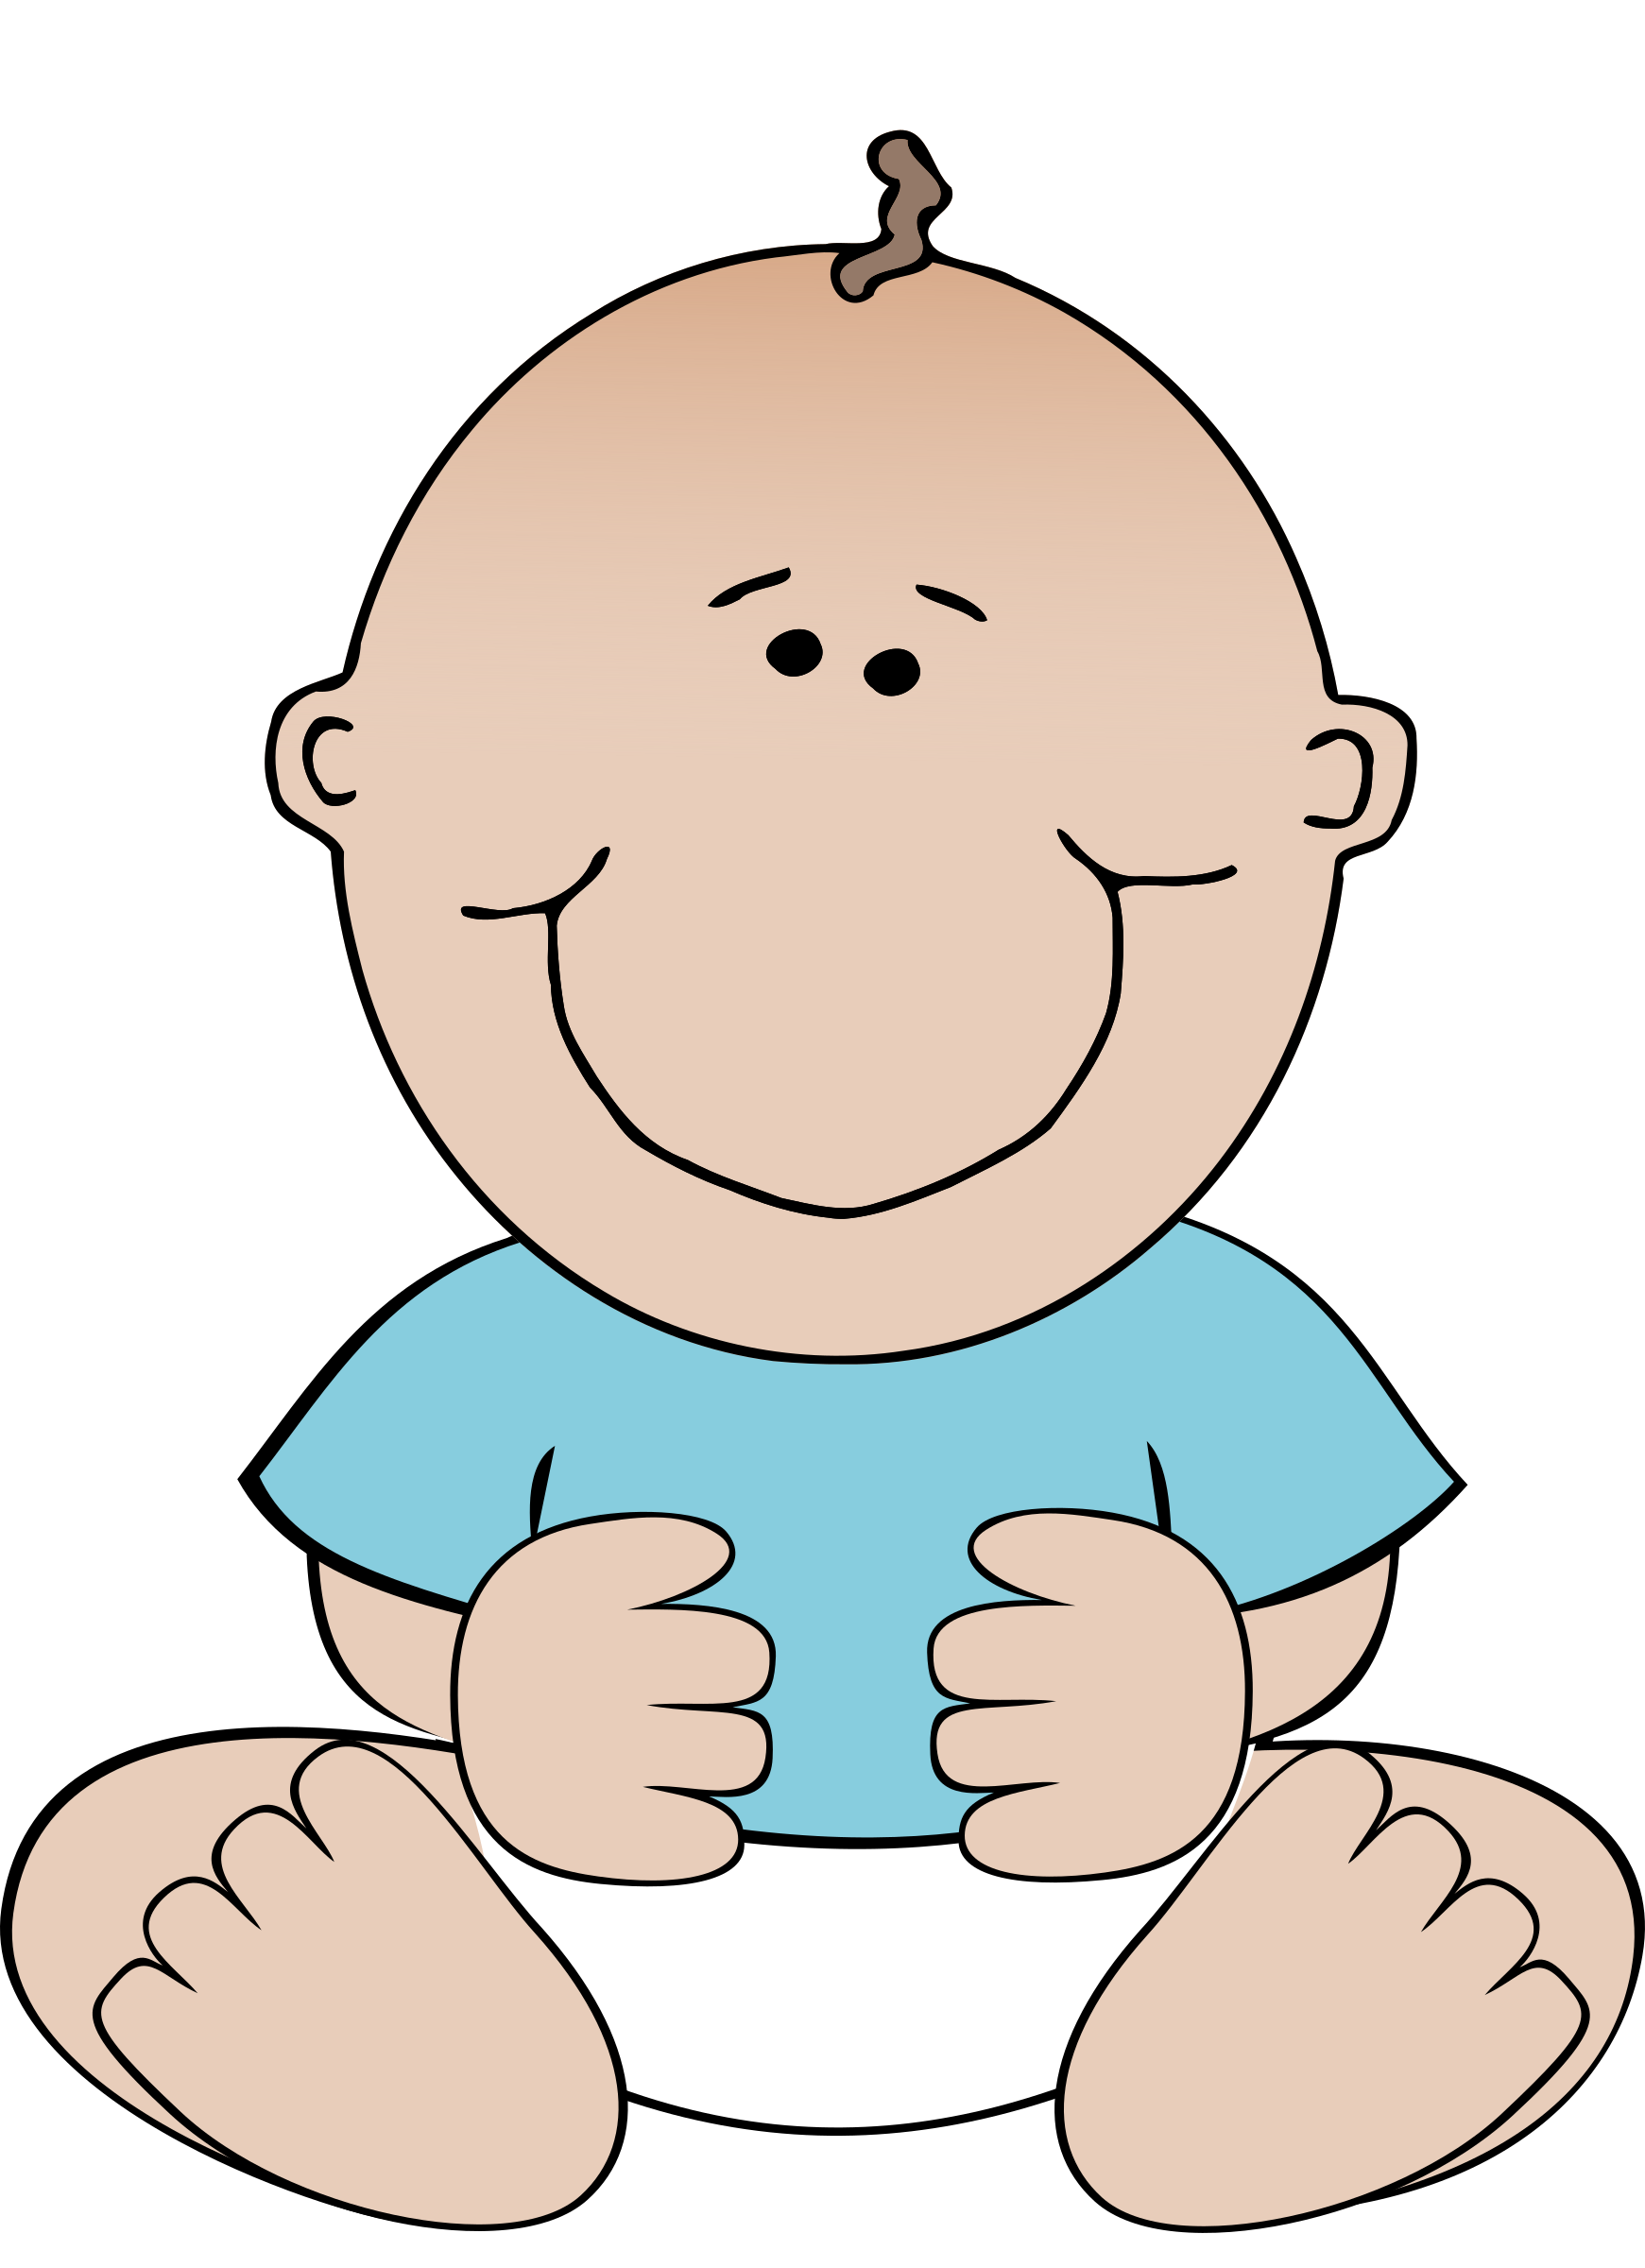 Download Baby Boy Sitting Vector Clipart image - Free stock photo - Public Domain photo - CC0 Images